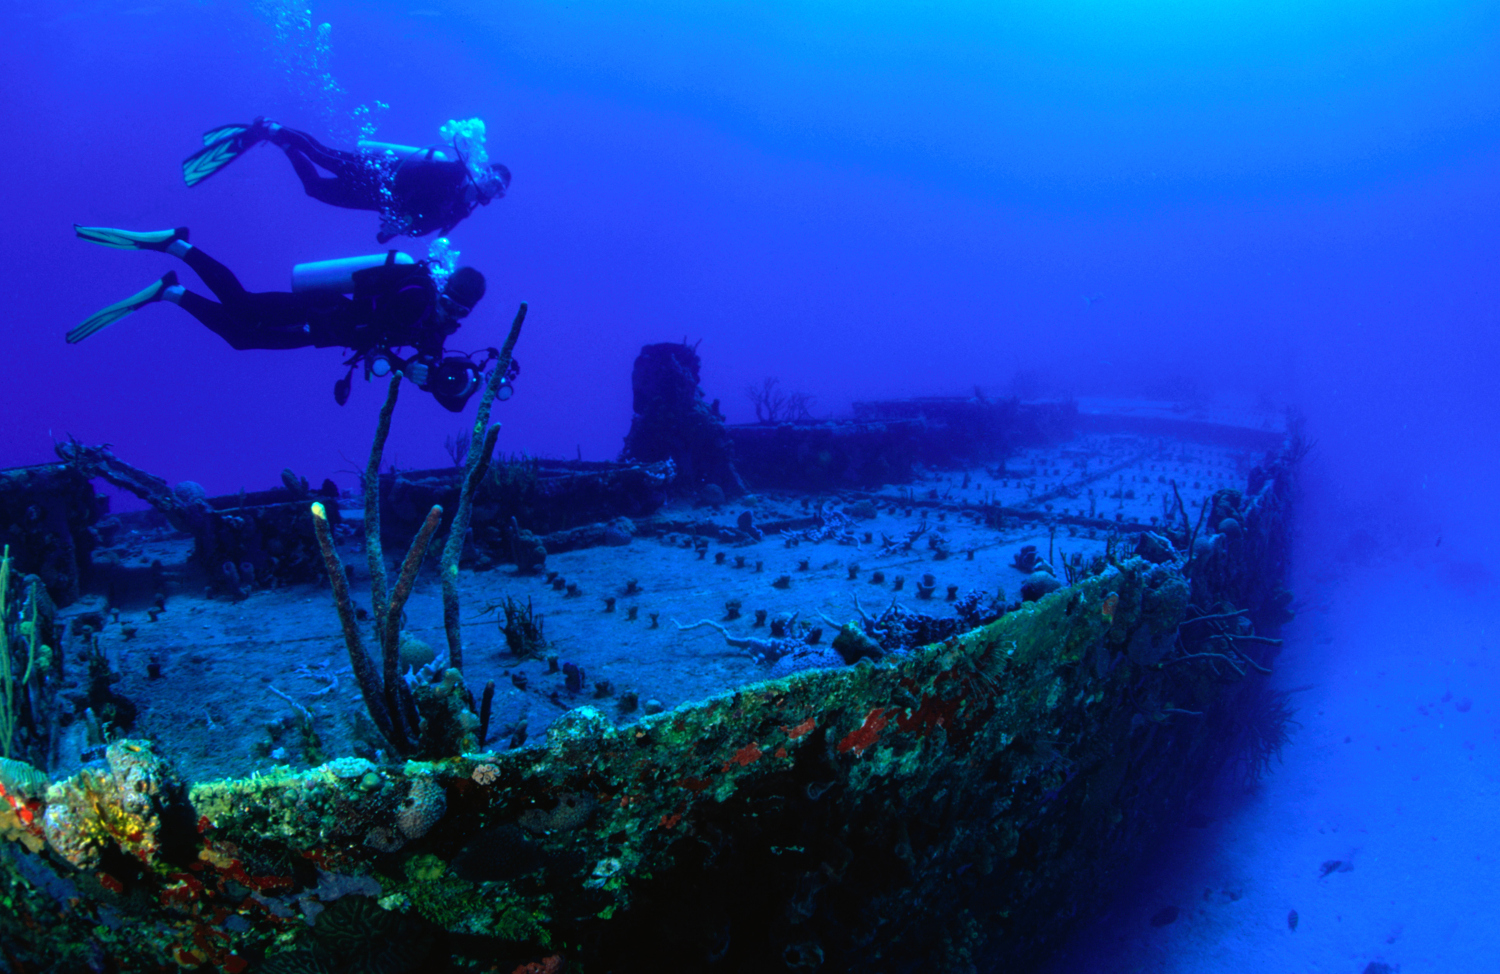 Wreck-diving around St Croix. Image by Steve Simonsen / LPI / Getty